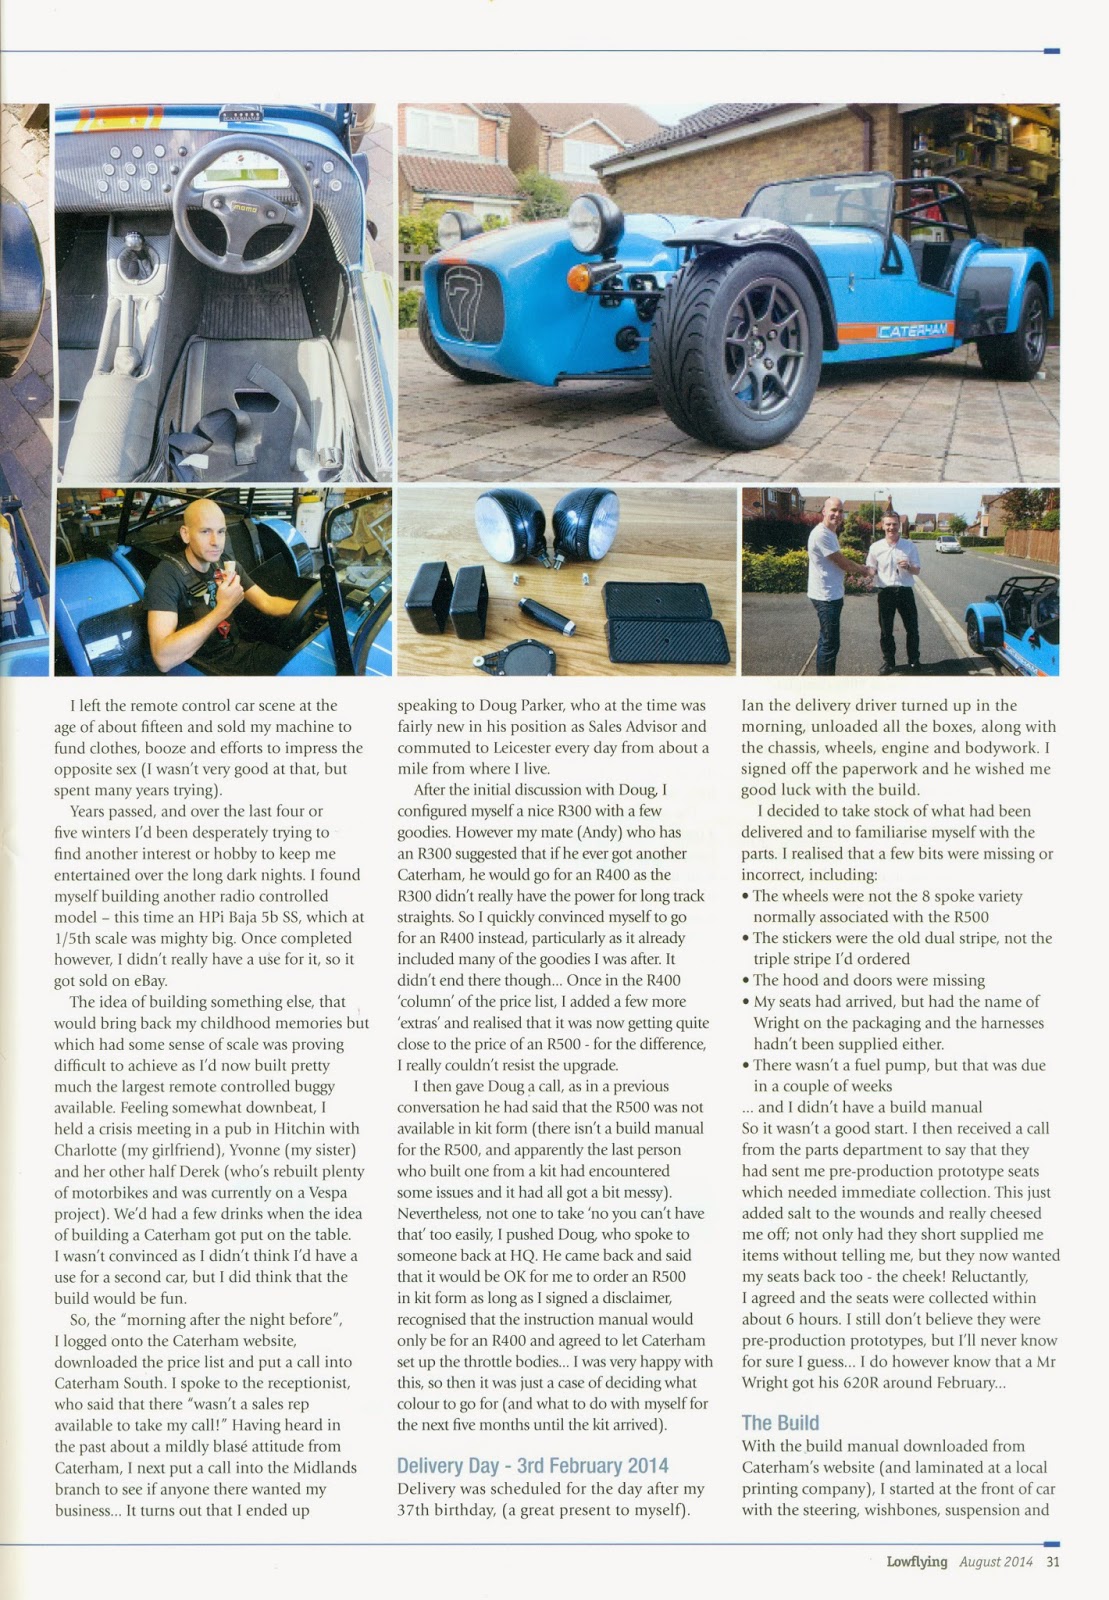 Page 31 of Lowflying Magazine - August 2014 Issue